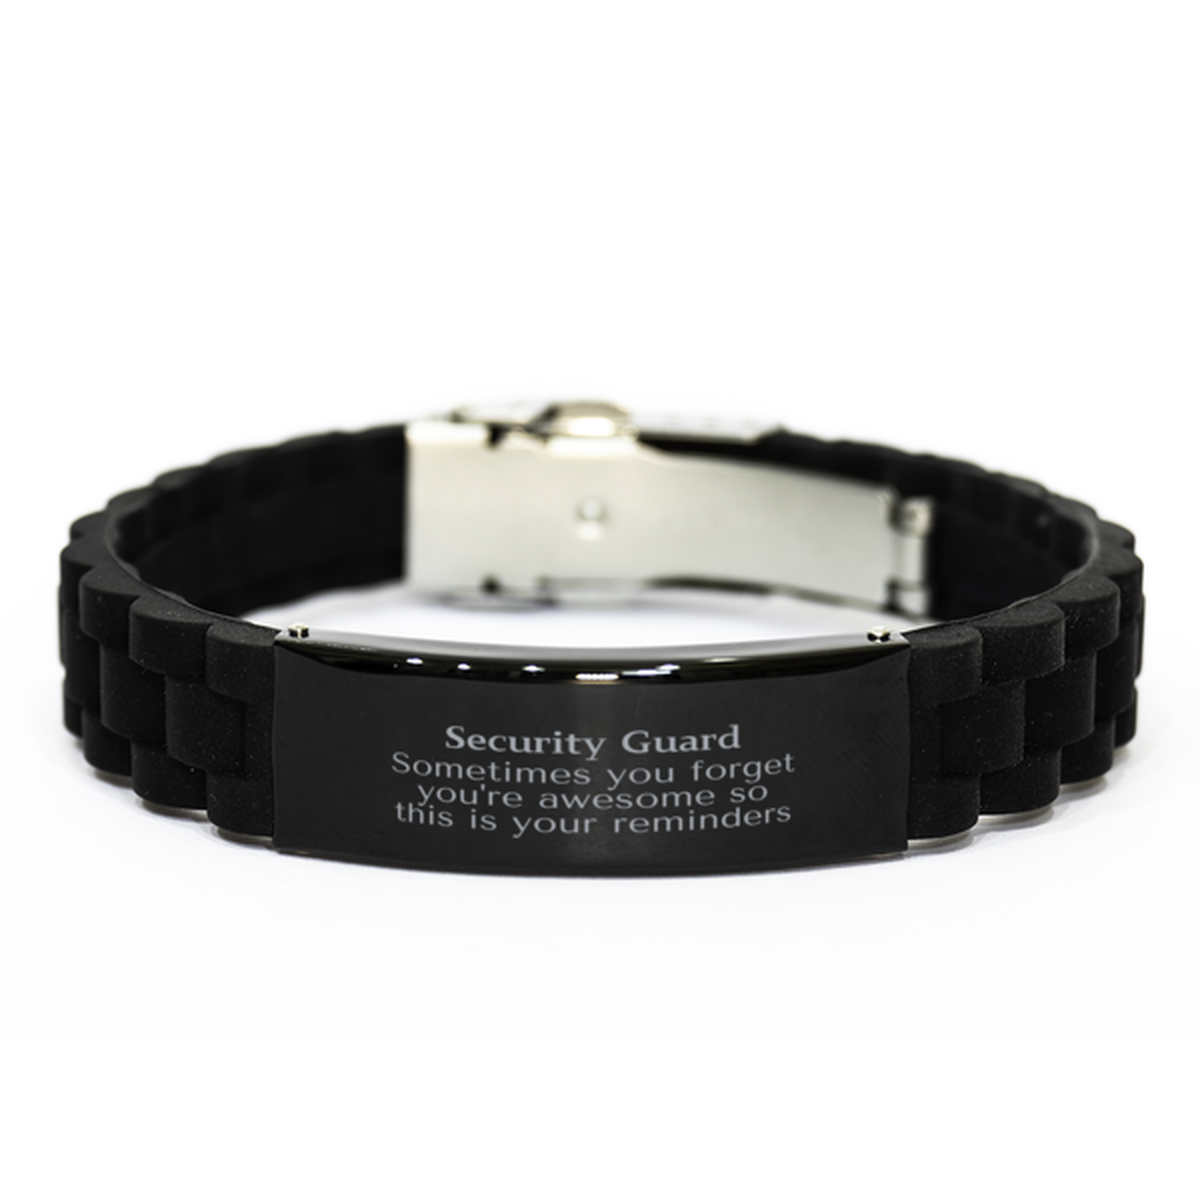 Sentimental Security Guard Black Glidelock Clasp Bracelet, Security Guard Sometimes you forget you're awesome so this is your reminders, Graduation Christmas Birthday Gifts for Security Guard, Men, Women, Coworkers